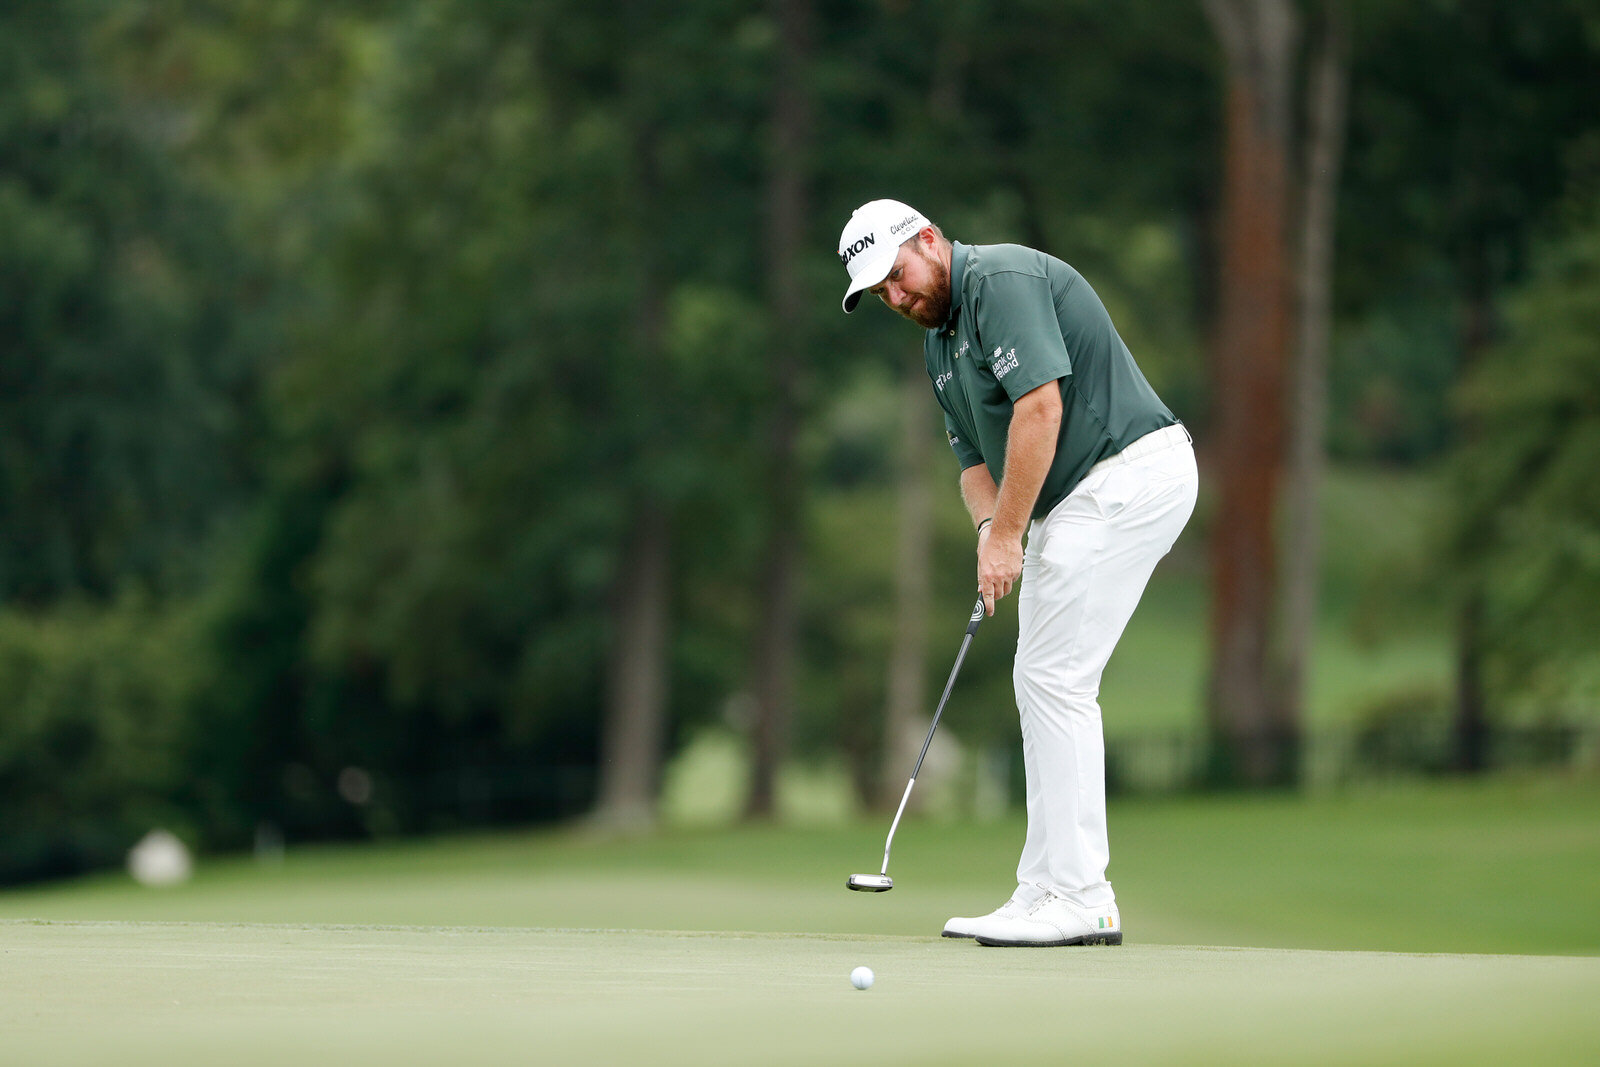  GREENSBORO, NORTH CAROLINA - AUGUST 14: Shane Lowry of Ireland putts on the ninth green during the second round of the Wyndham Championship at  Sedgefield Country Club on August 14, 2020 in Greensboro, North Carolina. (Photo by Chris Keane/Getty Ima